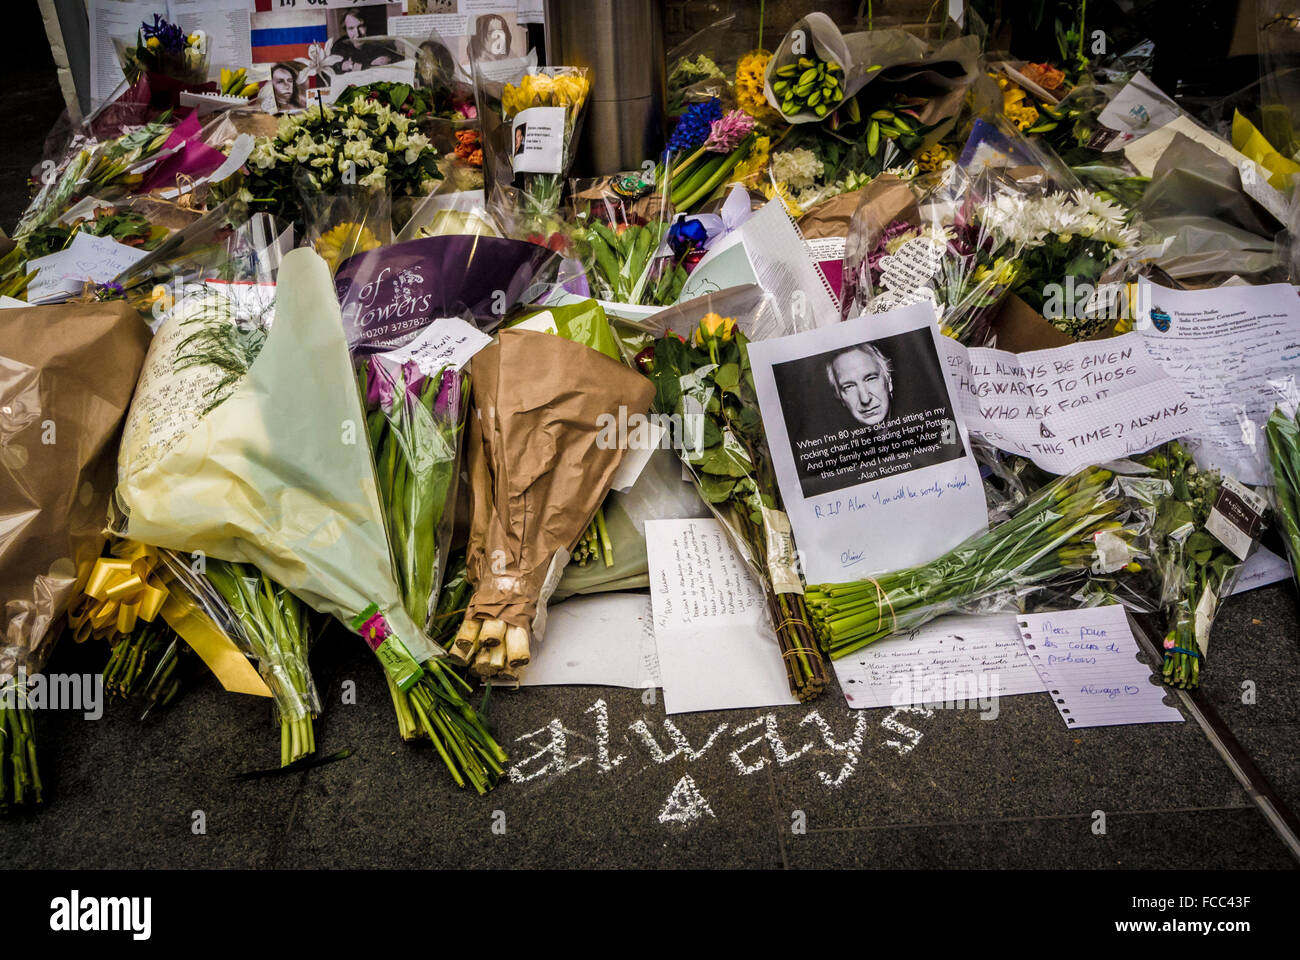 London, UK. 21st January, 2016. Tributes to actor Alan Rickman at Kings Cross Station. 'Platform 9 3/4', which features in the Harry Potter films, is a tourist attraction at the station. Fans of the actor, who played the part of Professor Snape and died on January 14th 2016, are continuing to leave cards and flowers in remembrance.  Photo Bailey-Cooper Photography/Alamy Live News Stock Photo